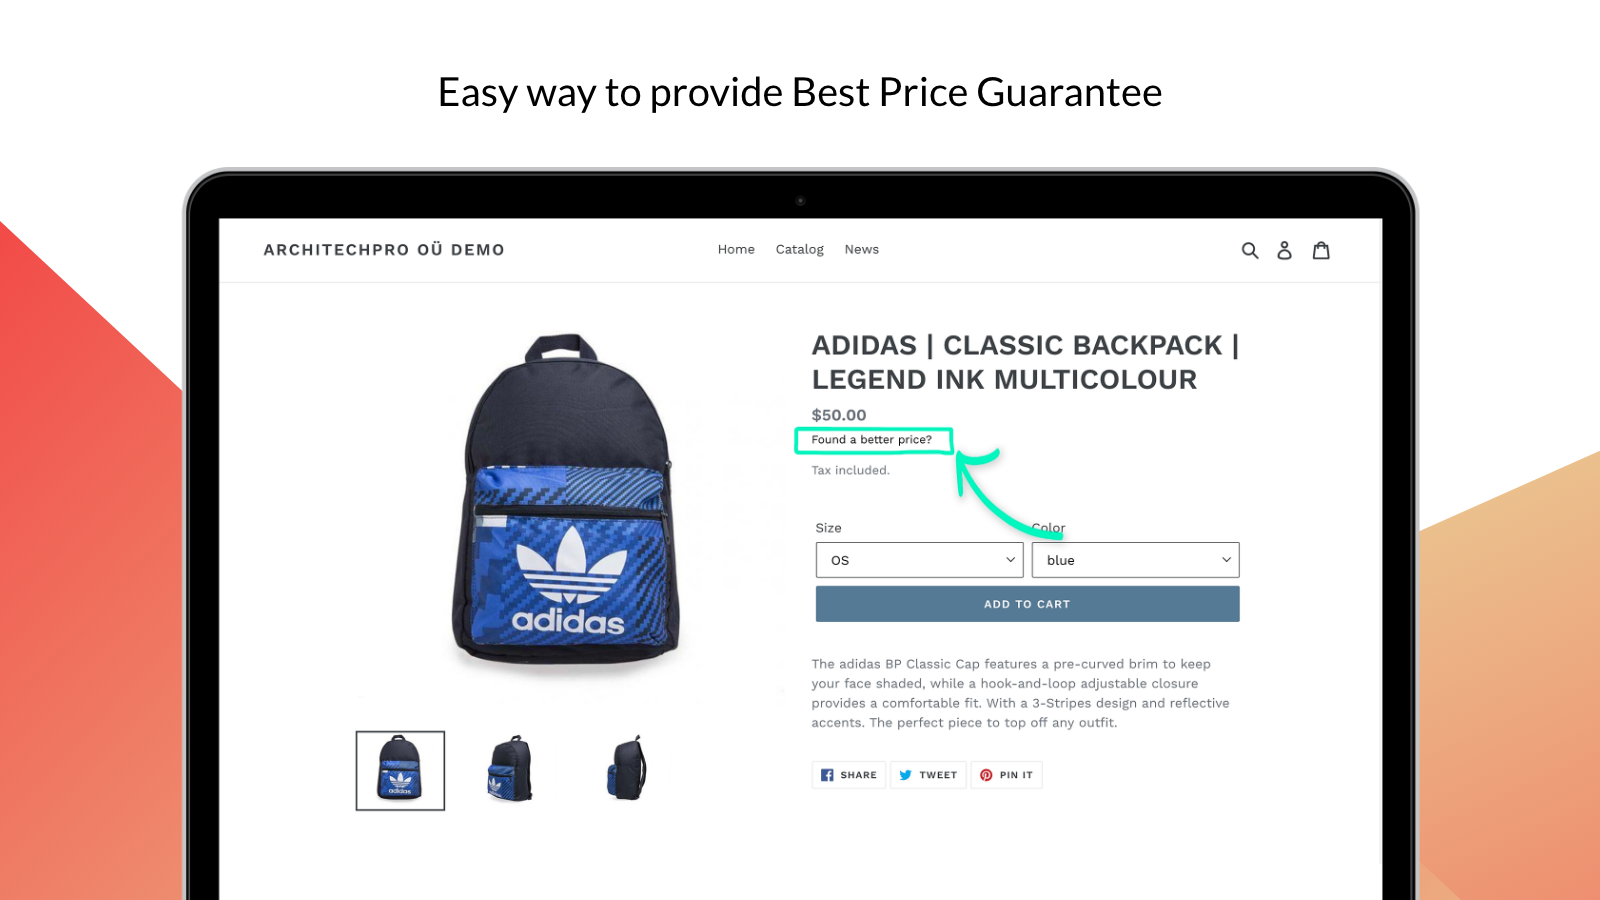 Best Price Guarantee link (button)